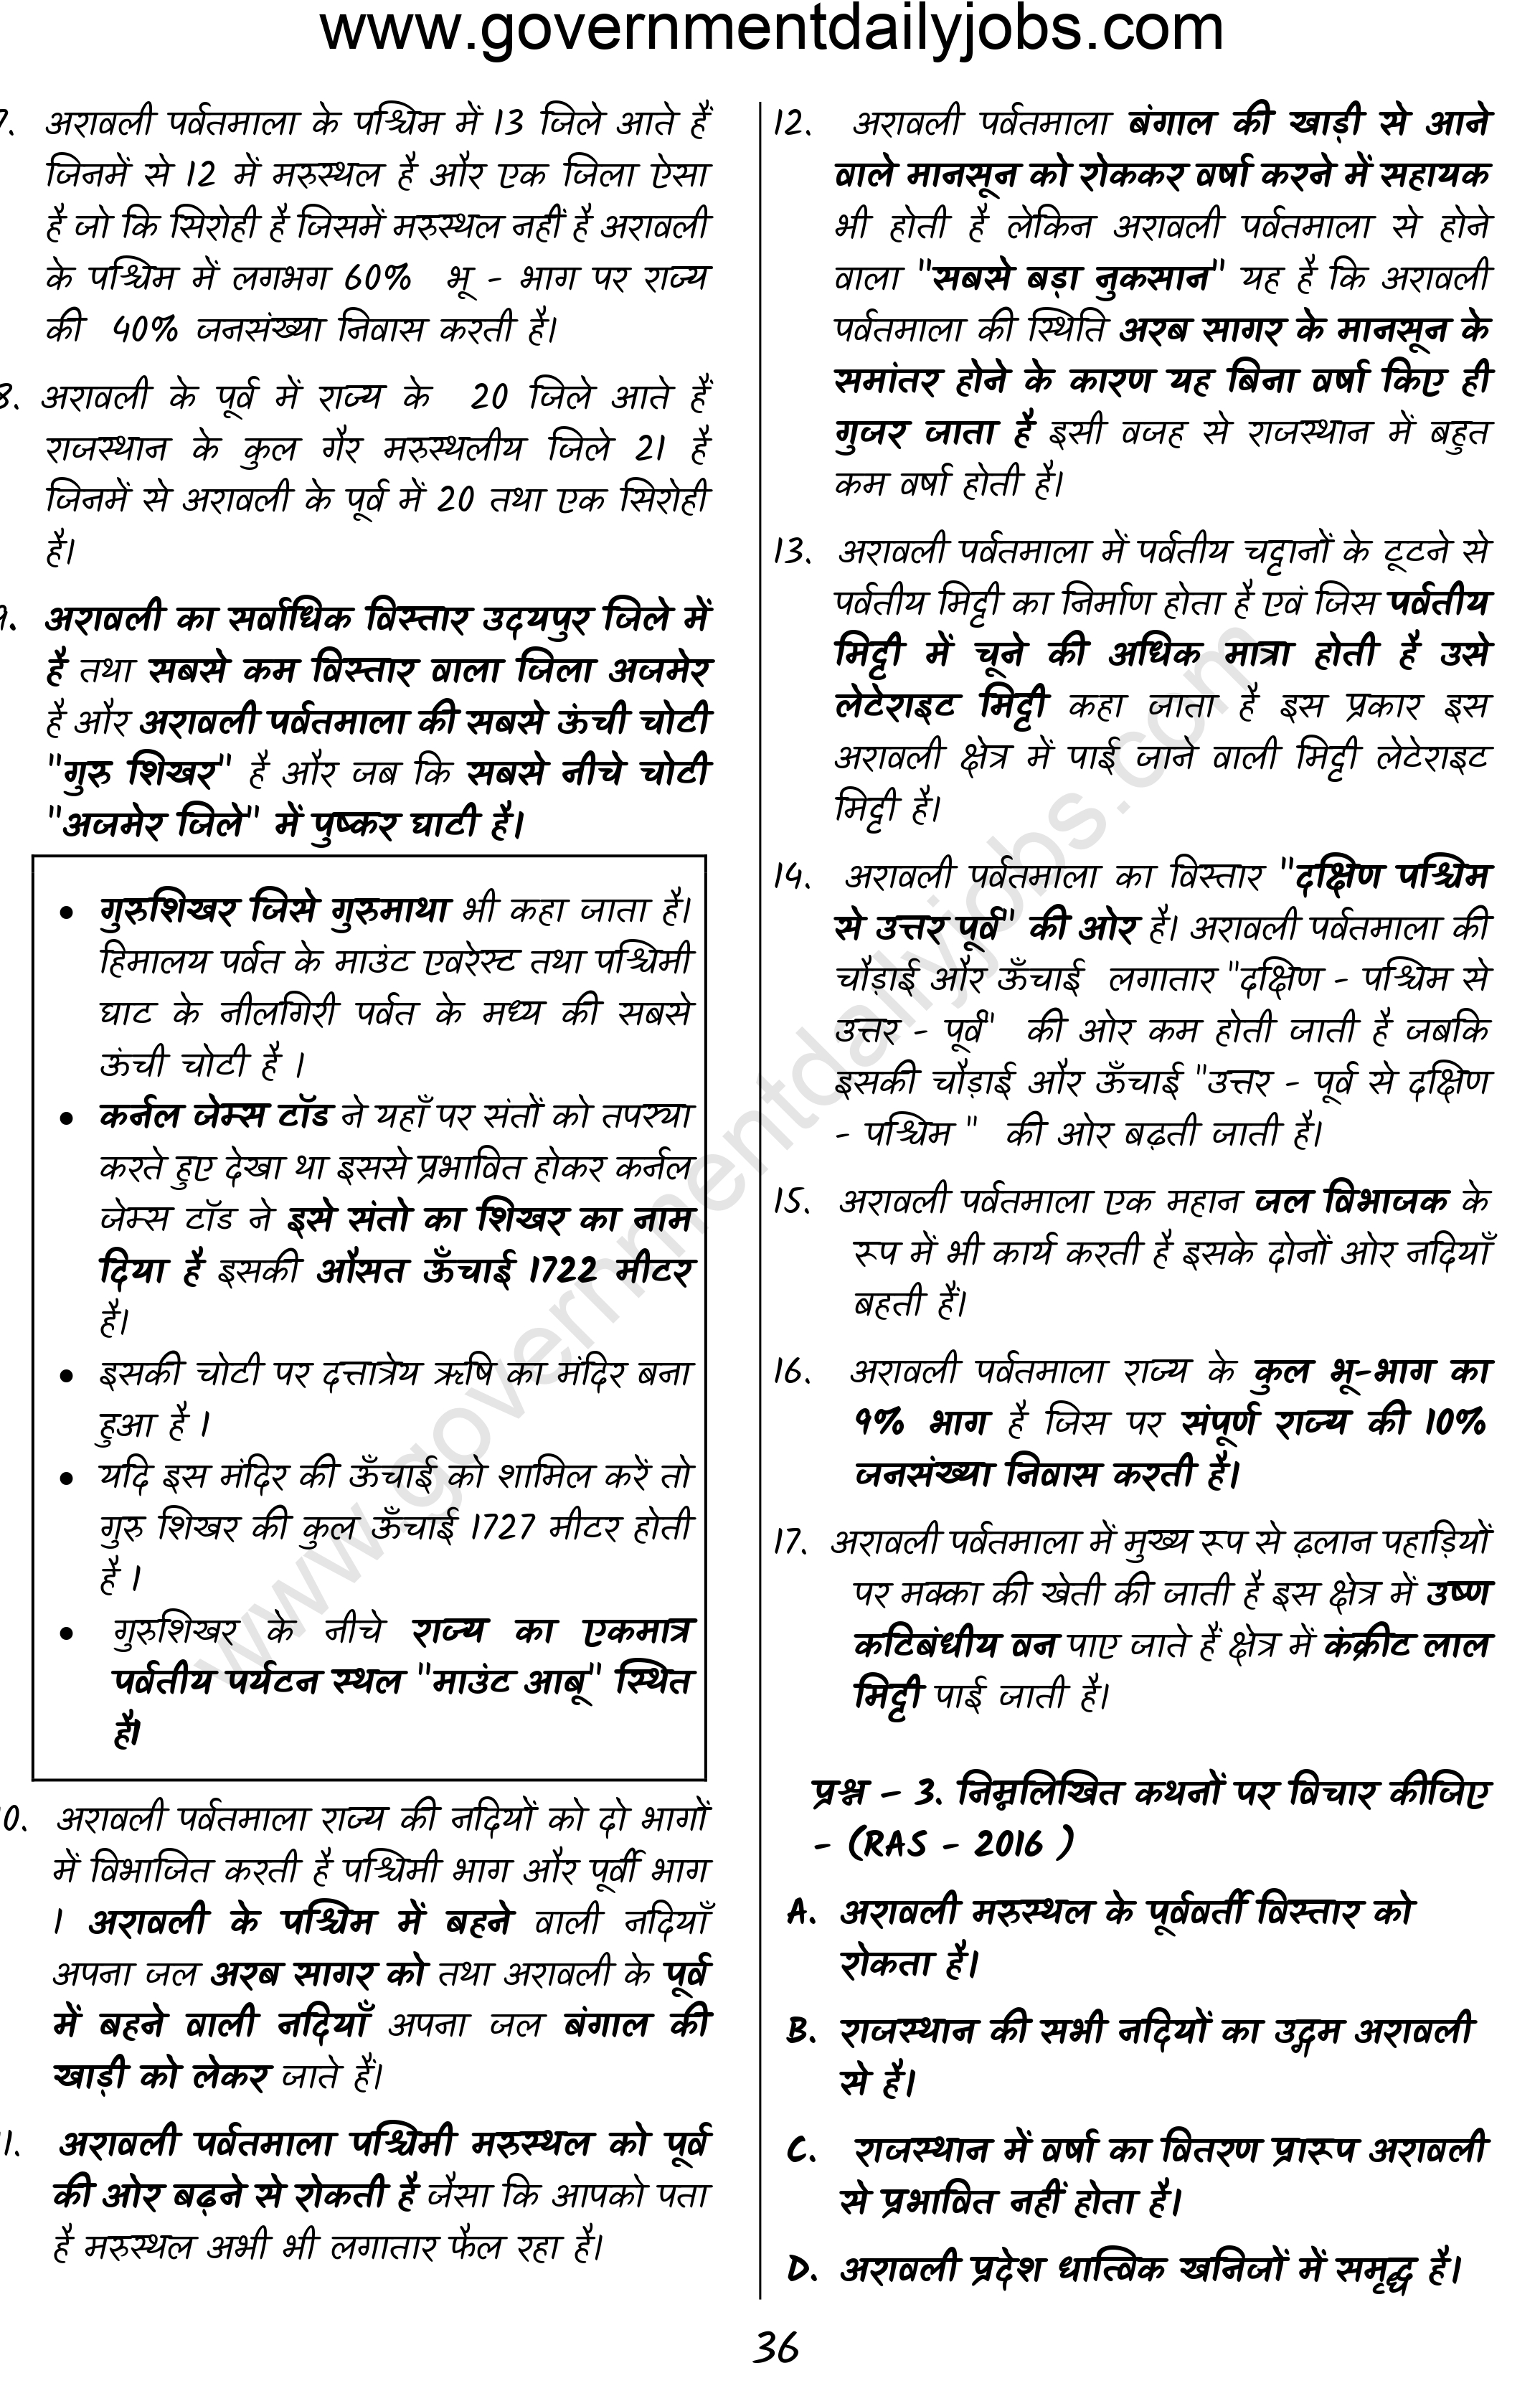 GK Questions on Rajasthan